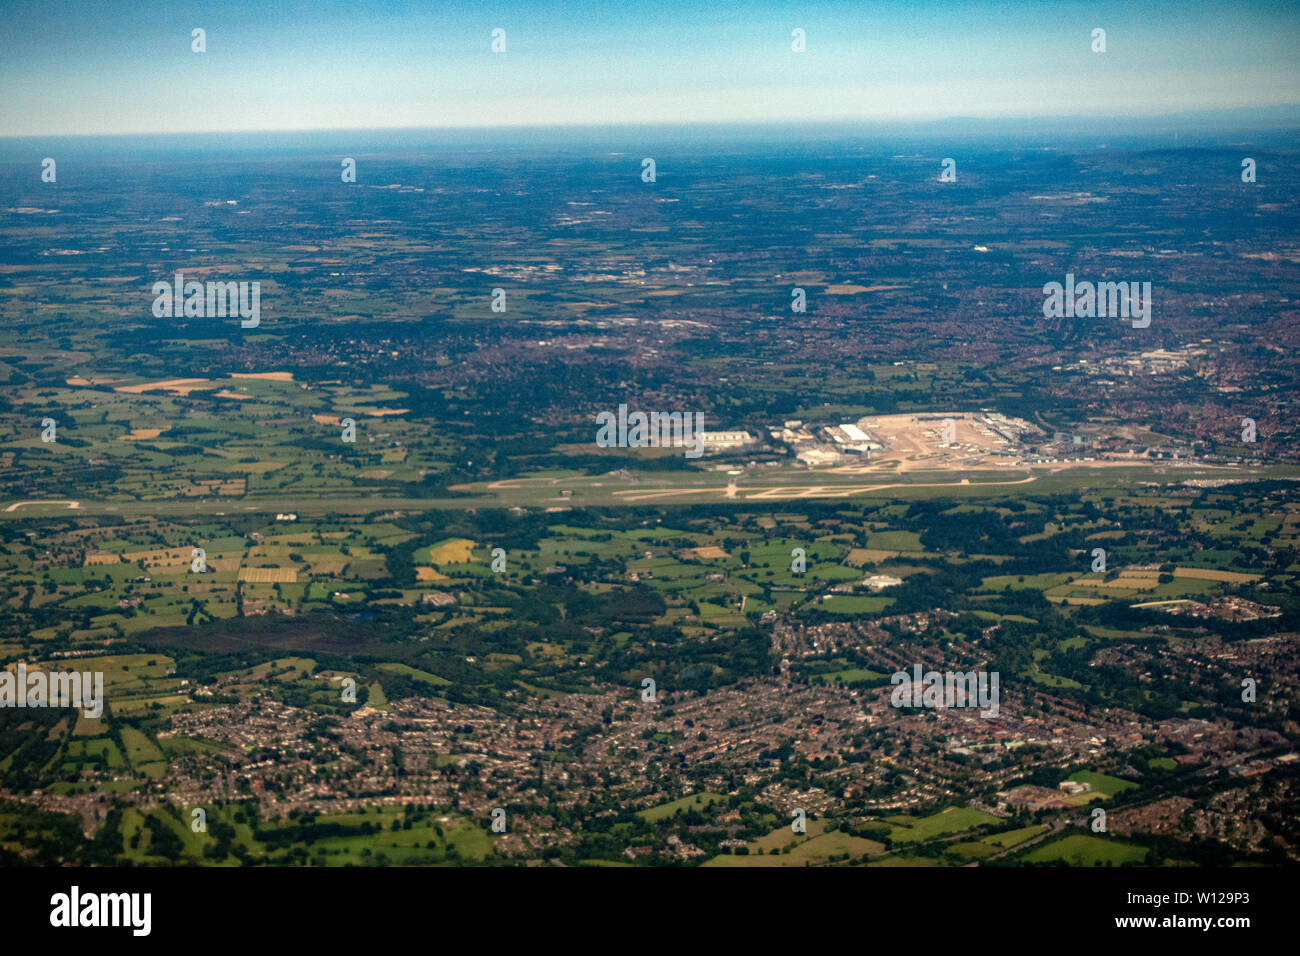 Aerial photograph of Manchester Airport from above with pilots viewpoint Stock Photo